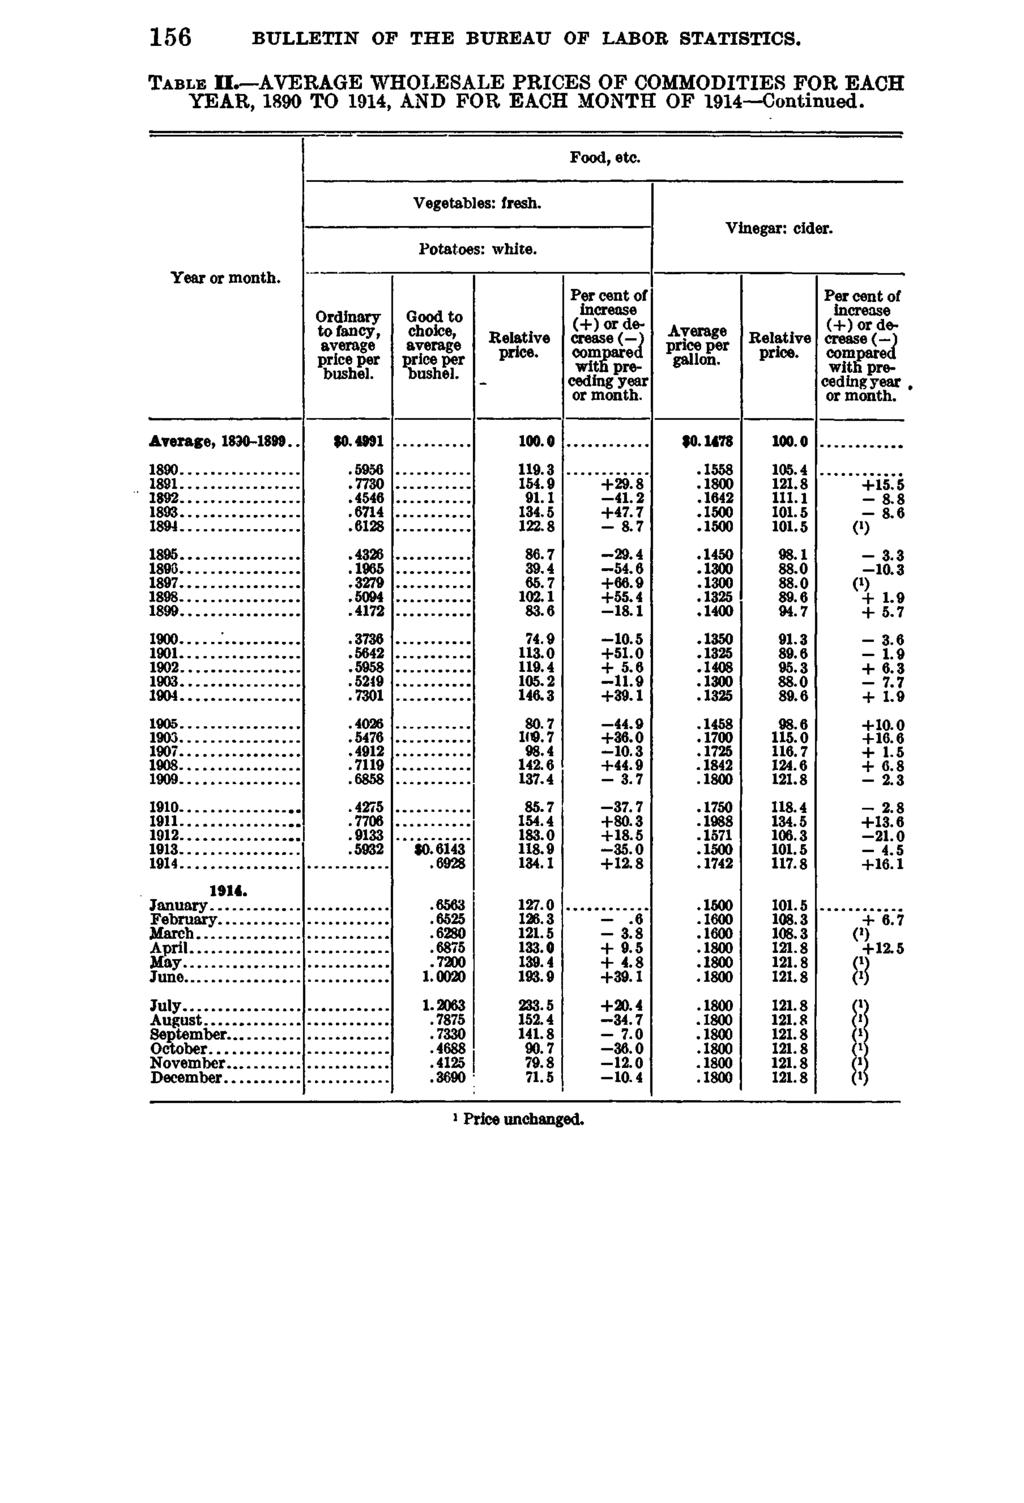 156 BULLETIN OF THE BUREAU OF LABOR STATISTICS. T a b l e I I. AVERAGE WHOLESALE PRICES OF COMMODITIES FOR EACH YEAR, 1890 TO 1914, AND FOR EACH MONTH OF 1914 Continued. Food, etc. Vegetables: fresh.